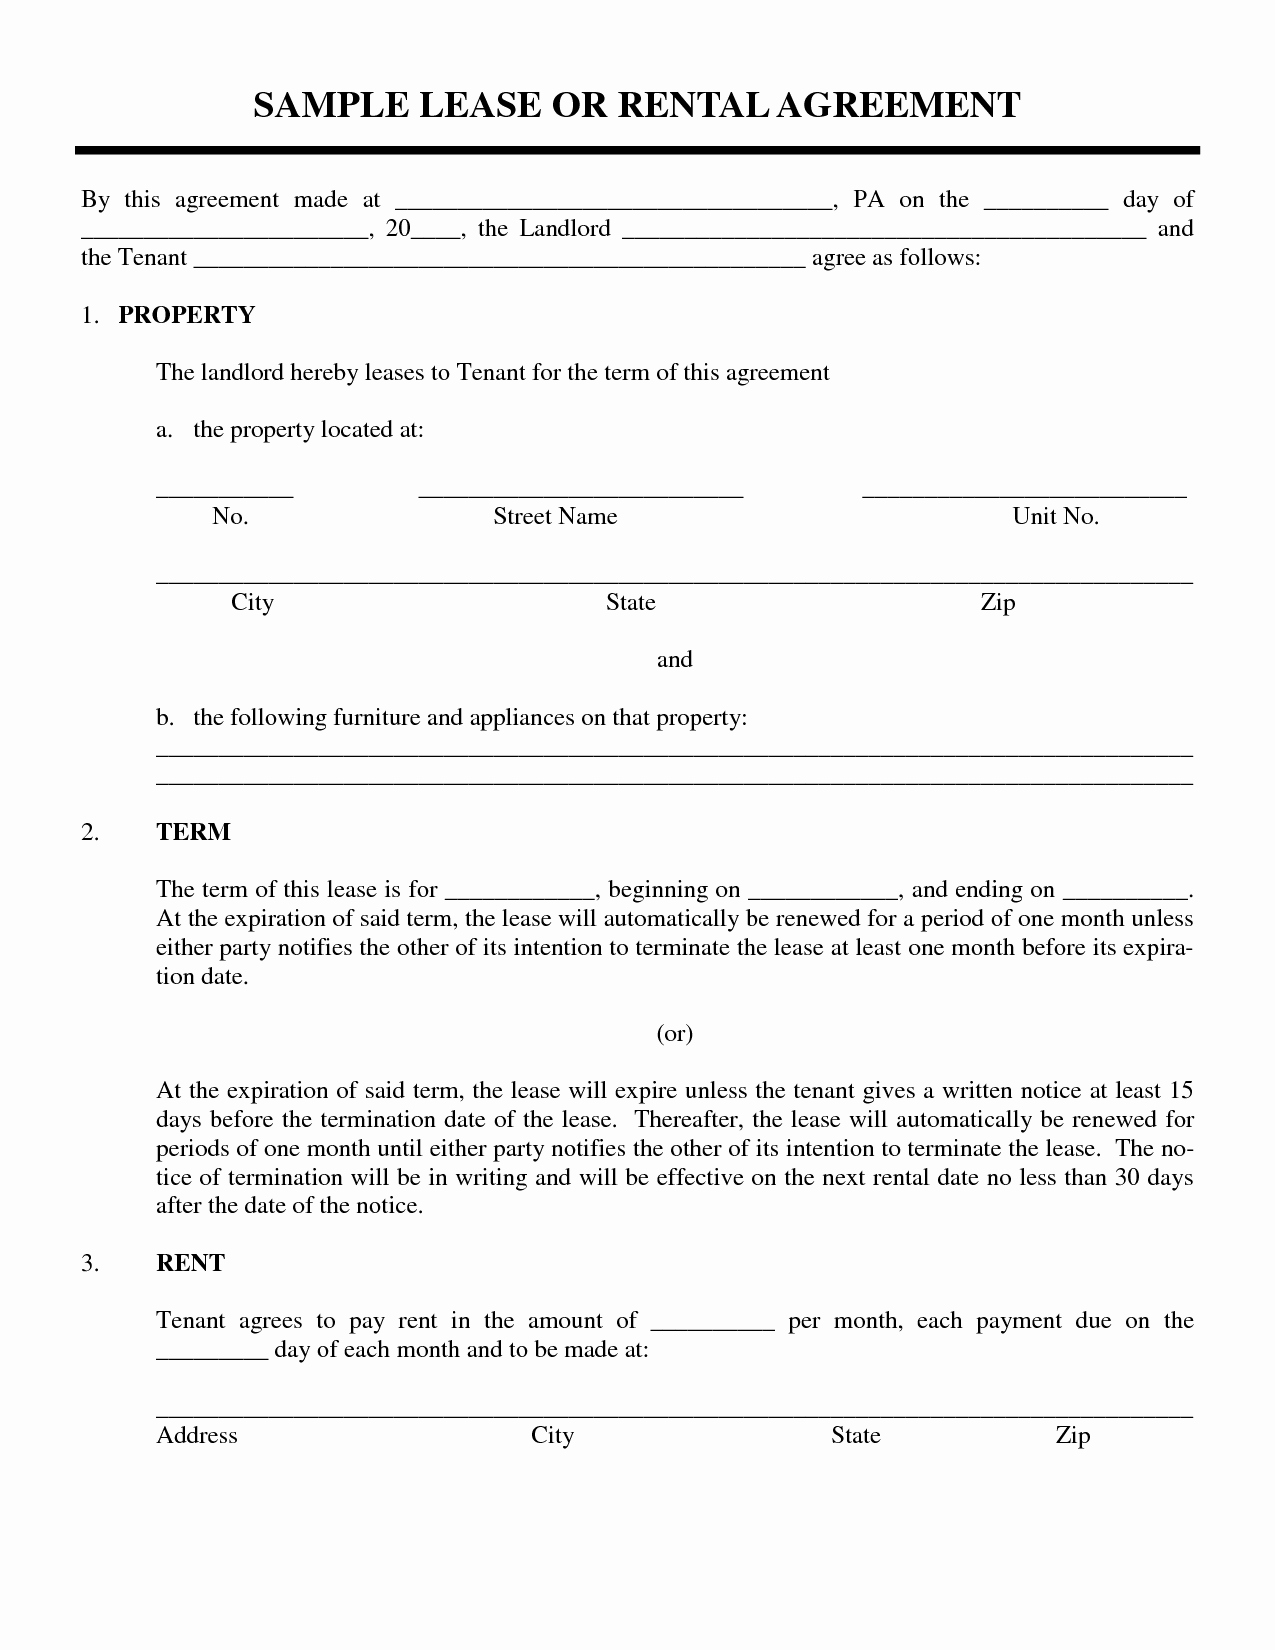 Lease Transfer Agreement Template Lovely Sample Lease or Rental Agreement